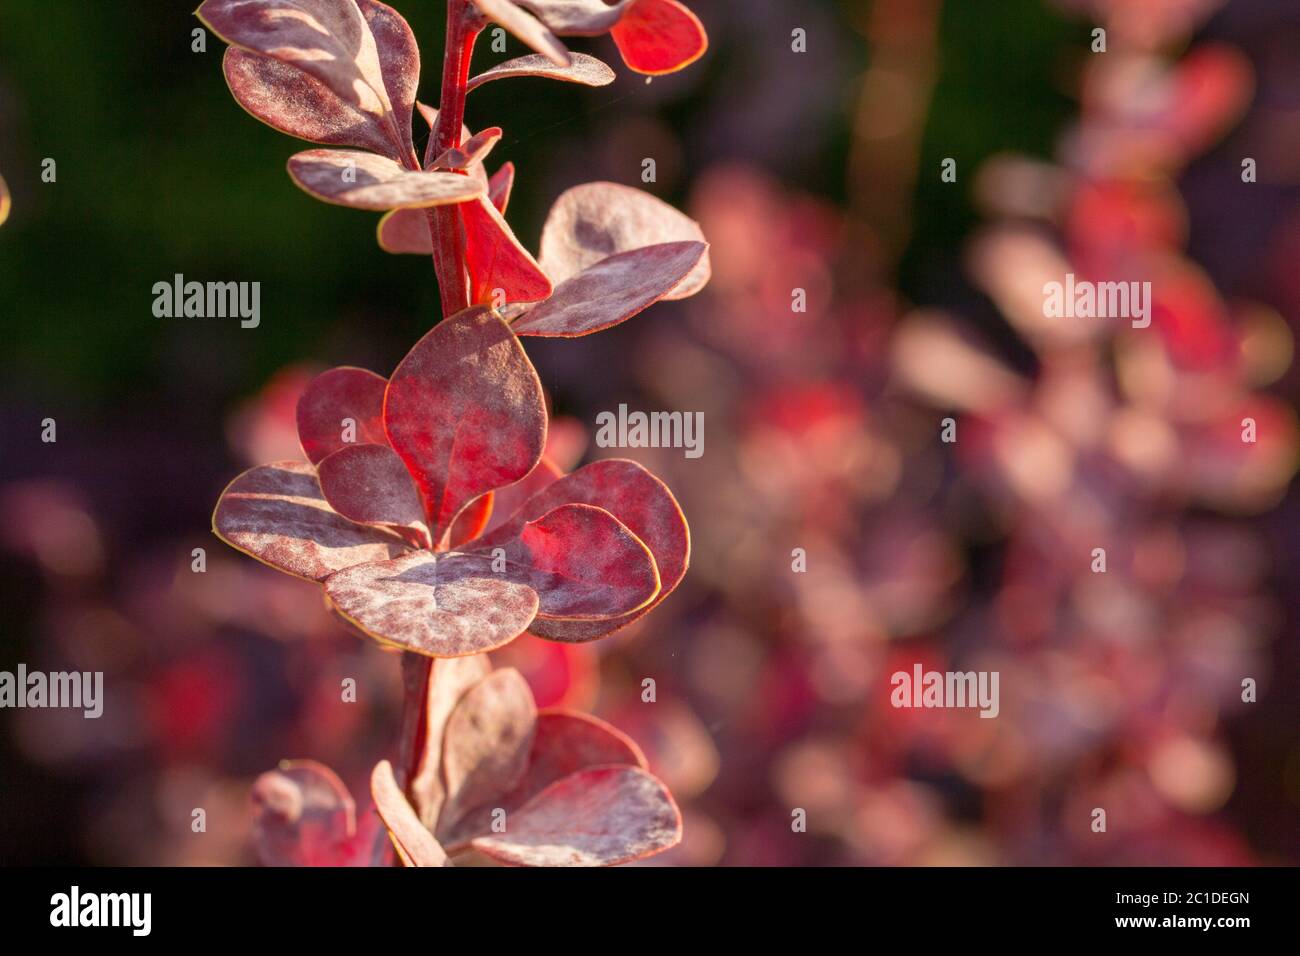 Escape barberry ill with powdery mildew, fungal disease of plants Stock Photo